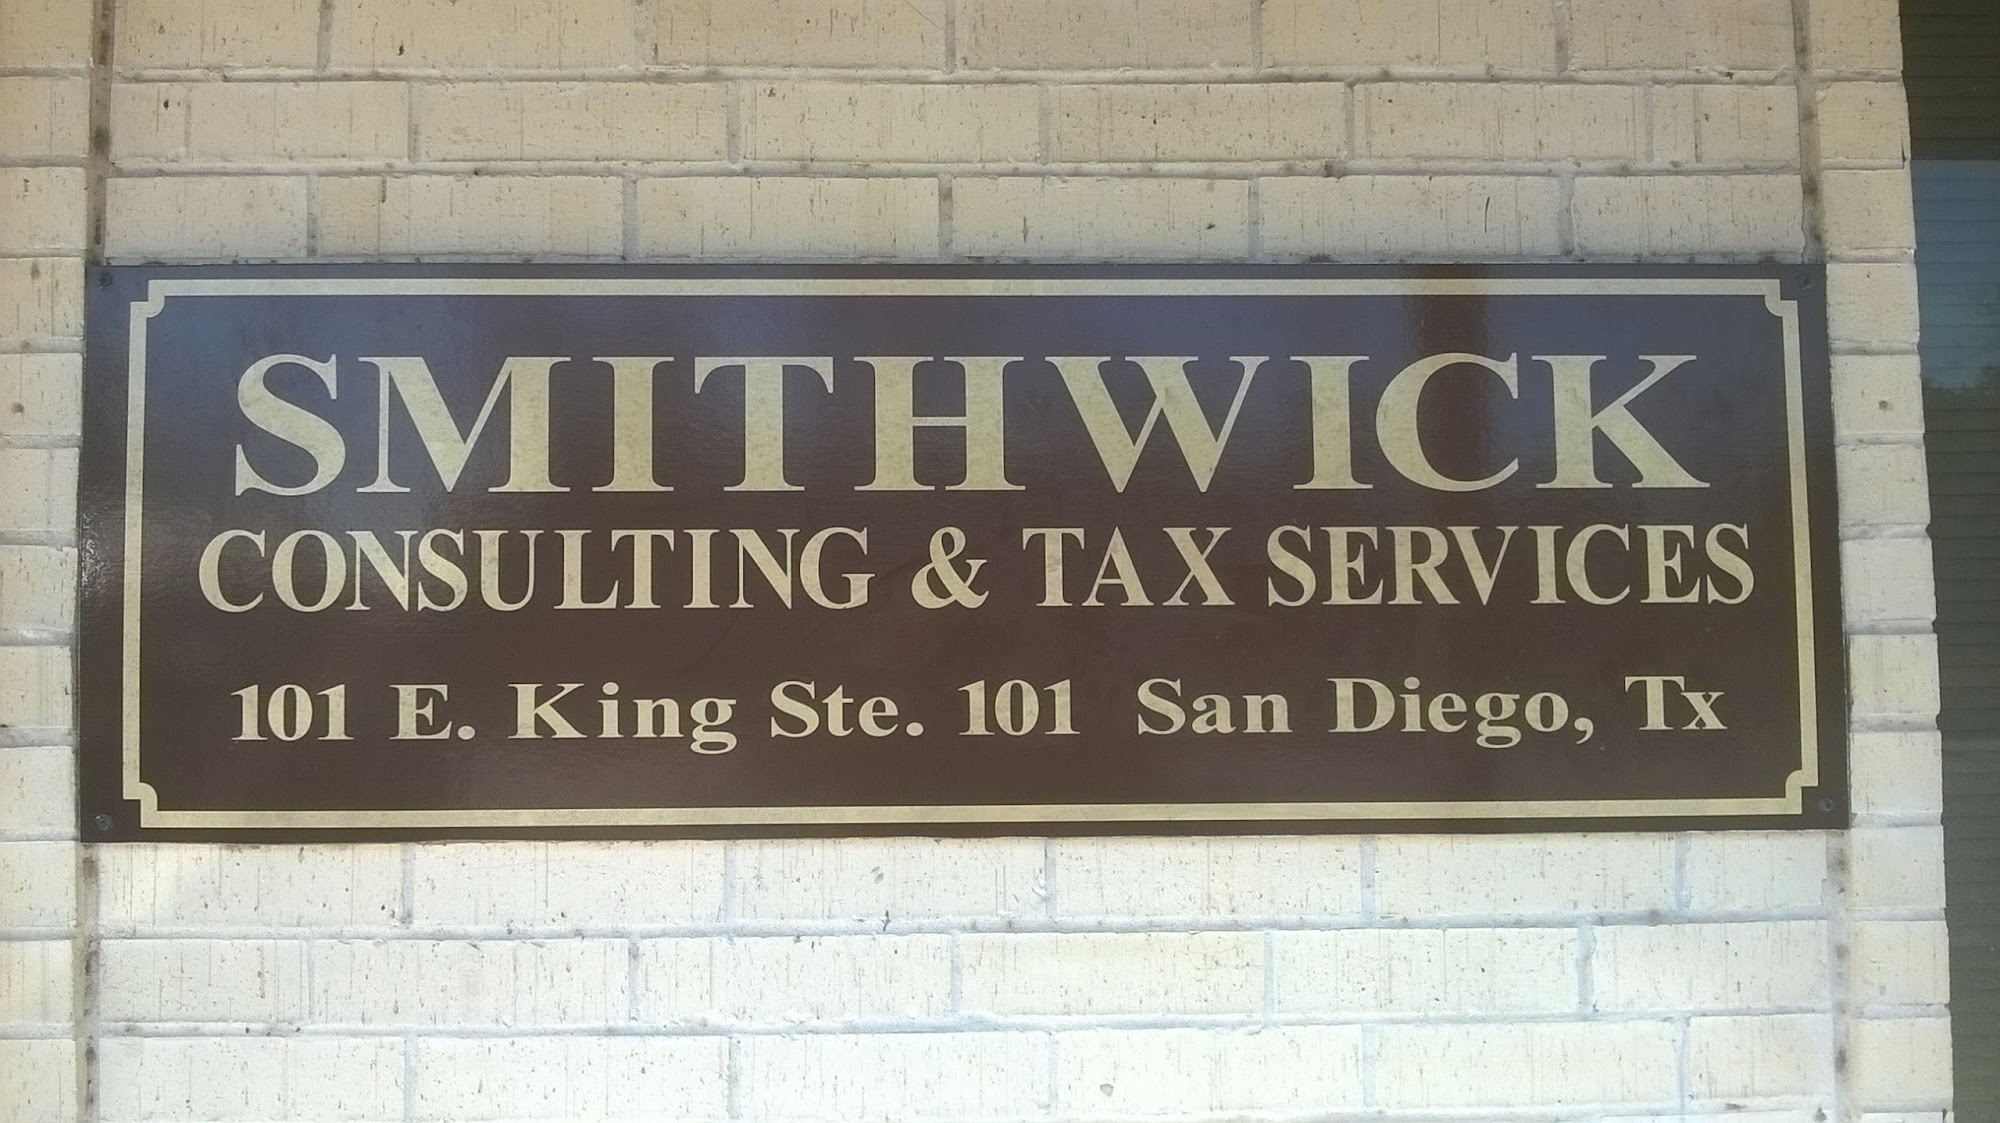 Smithwick Consulting and Tax Services 101 E King Ave, San Diego Texas 78384